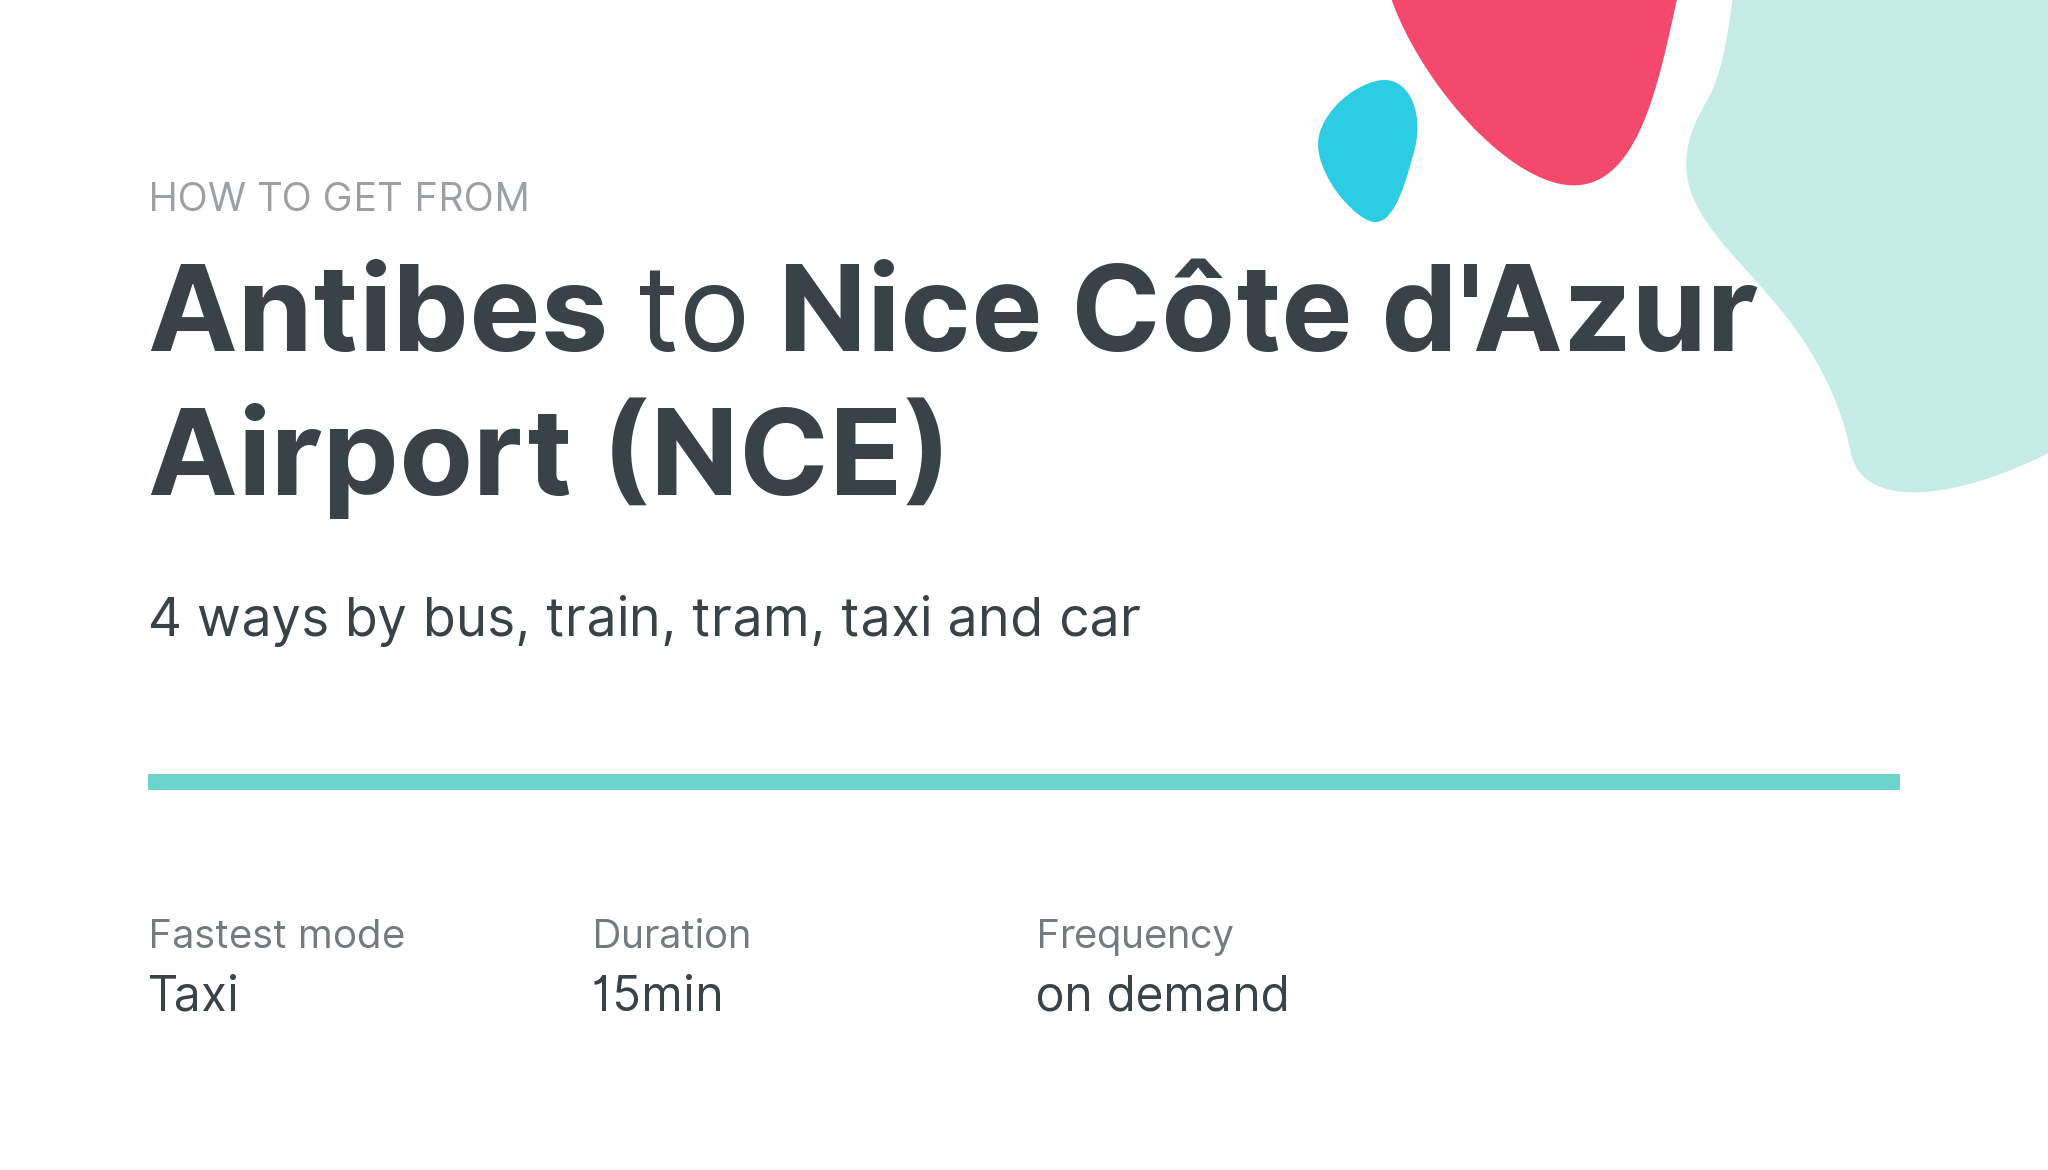 How do I get from Antibes to Nice Côte d'Azur Airport (NCE)